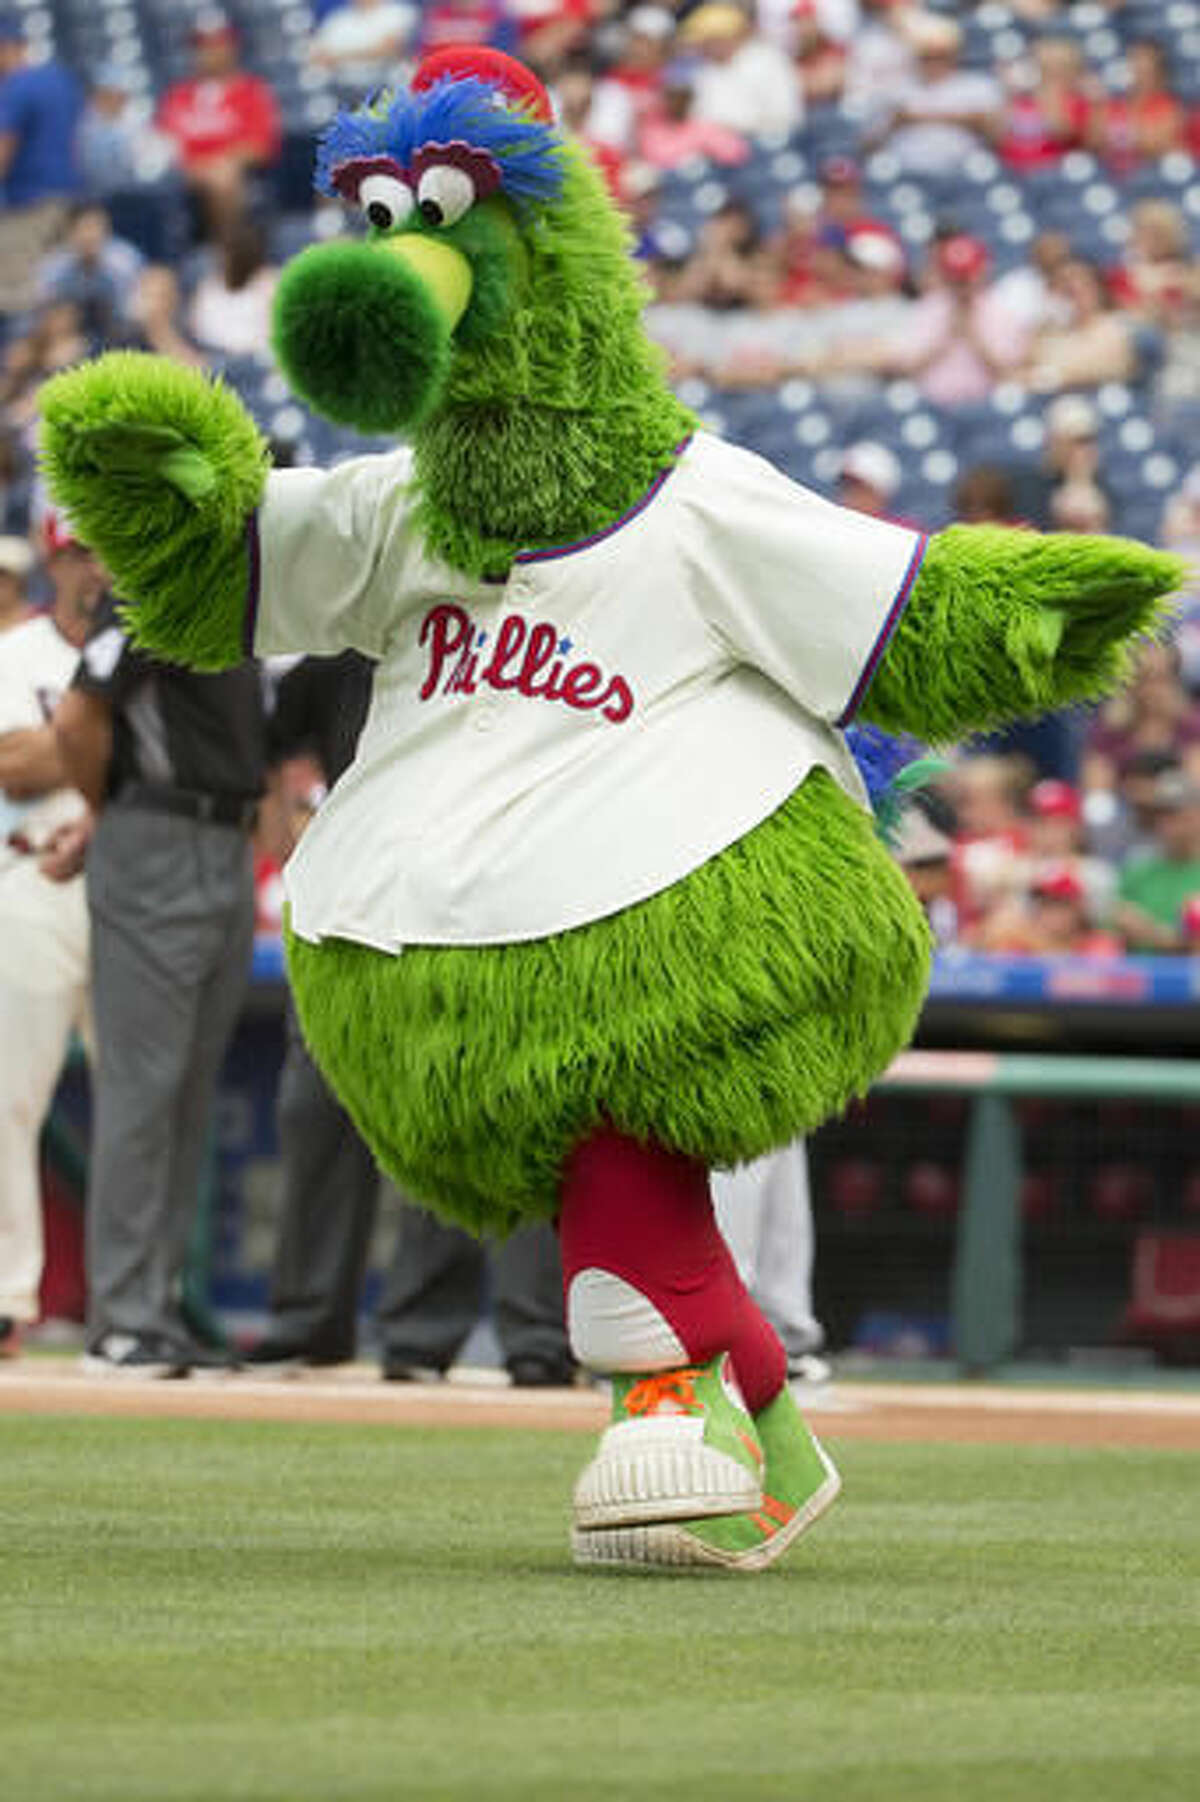 FILE - In this July 4, 2016, file photo, the Phillie Phanatic in action prior to the first inning of a baseball game between the Atlanta Braves and the Philadelphia Phillies in Philadelphia. The Phillie Phanatic is among the 10 pro and seven collegiate mascots that have been inducted into the Mascot Hall of Fame will be built in Whiting, Ind. (AP Photo/Chris Szagola, file)